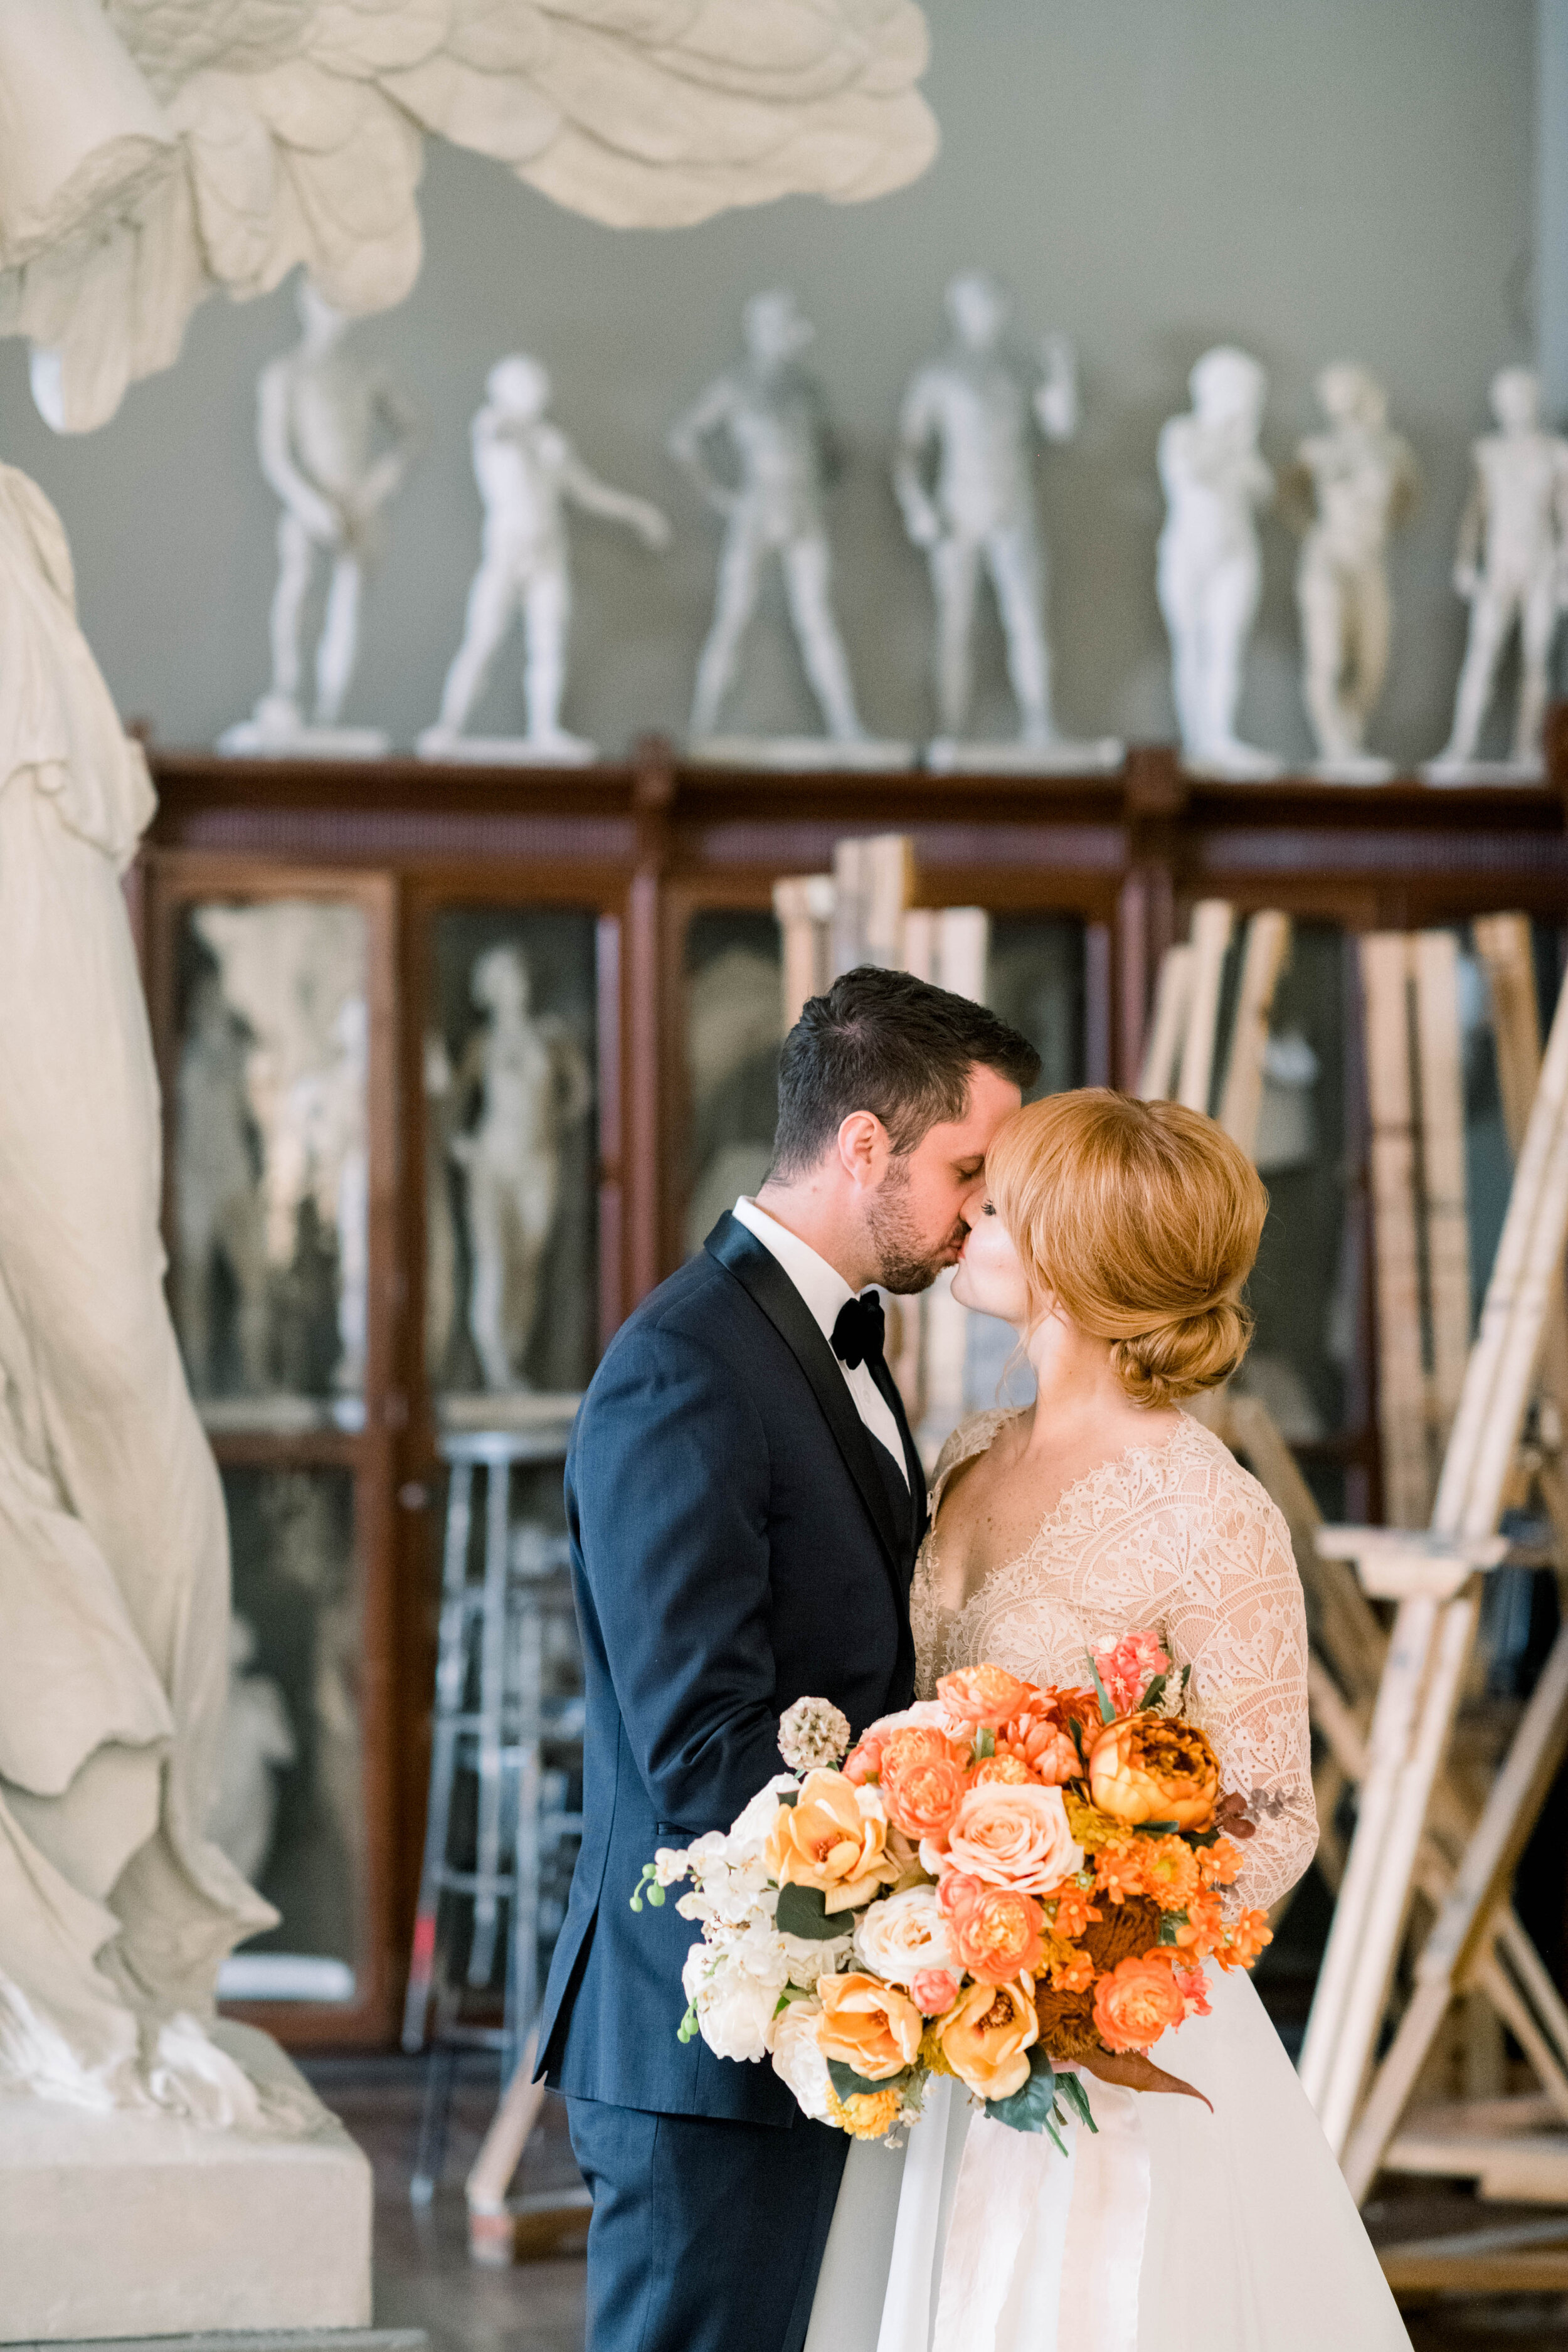 Fine art wedding inspiration with Kelly Faetanini dress and fall florals at PAFA museum in Philadelphia by Liz Andolina Photography